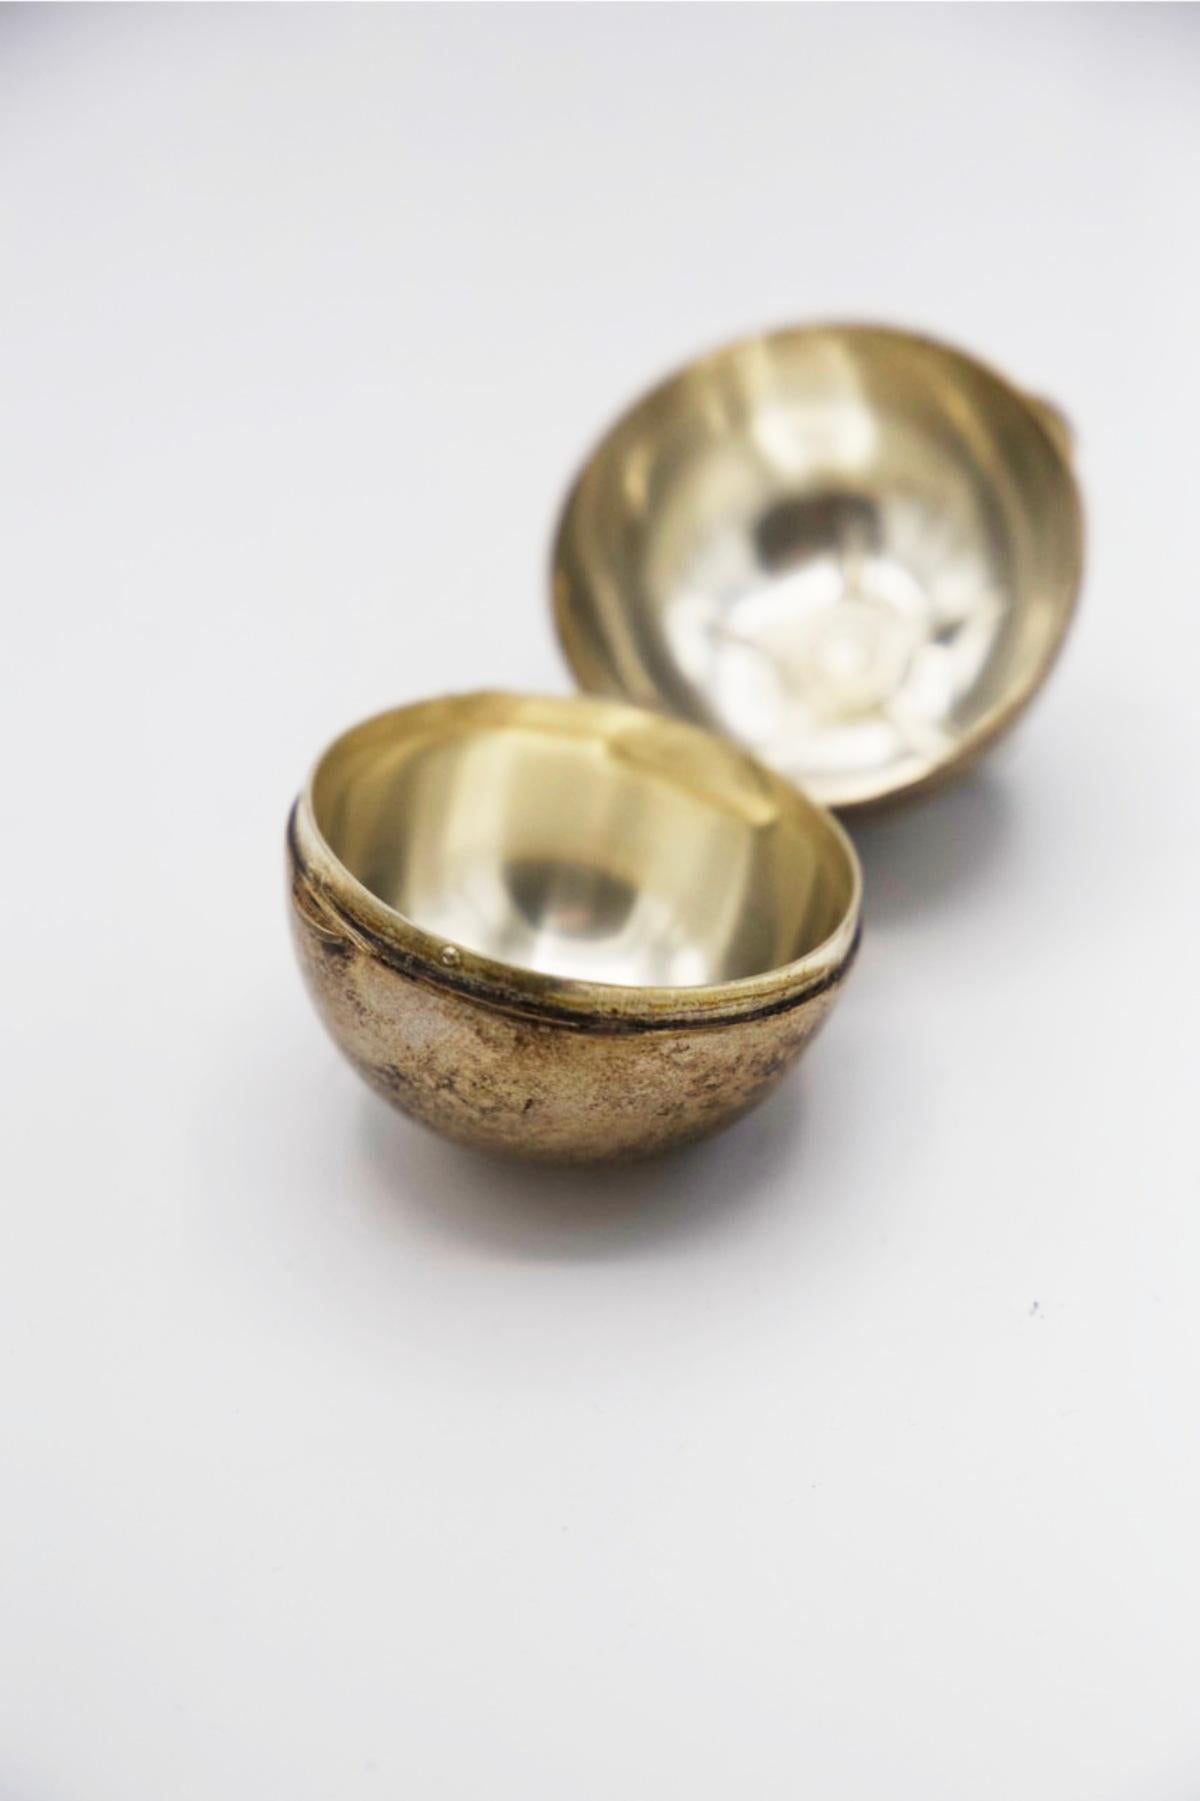 Beautiful gilded metal pill box designed in the 1950s of fine Italian manufacture.
The pill box is small and has a beautiful apple shape, made entirely of light gold-plated metal on the outside, very beautiful.
The inside is also made of gilded